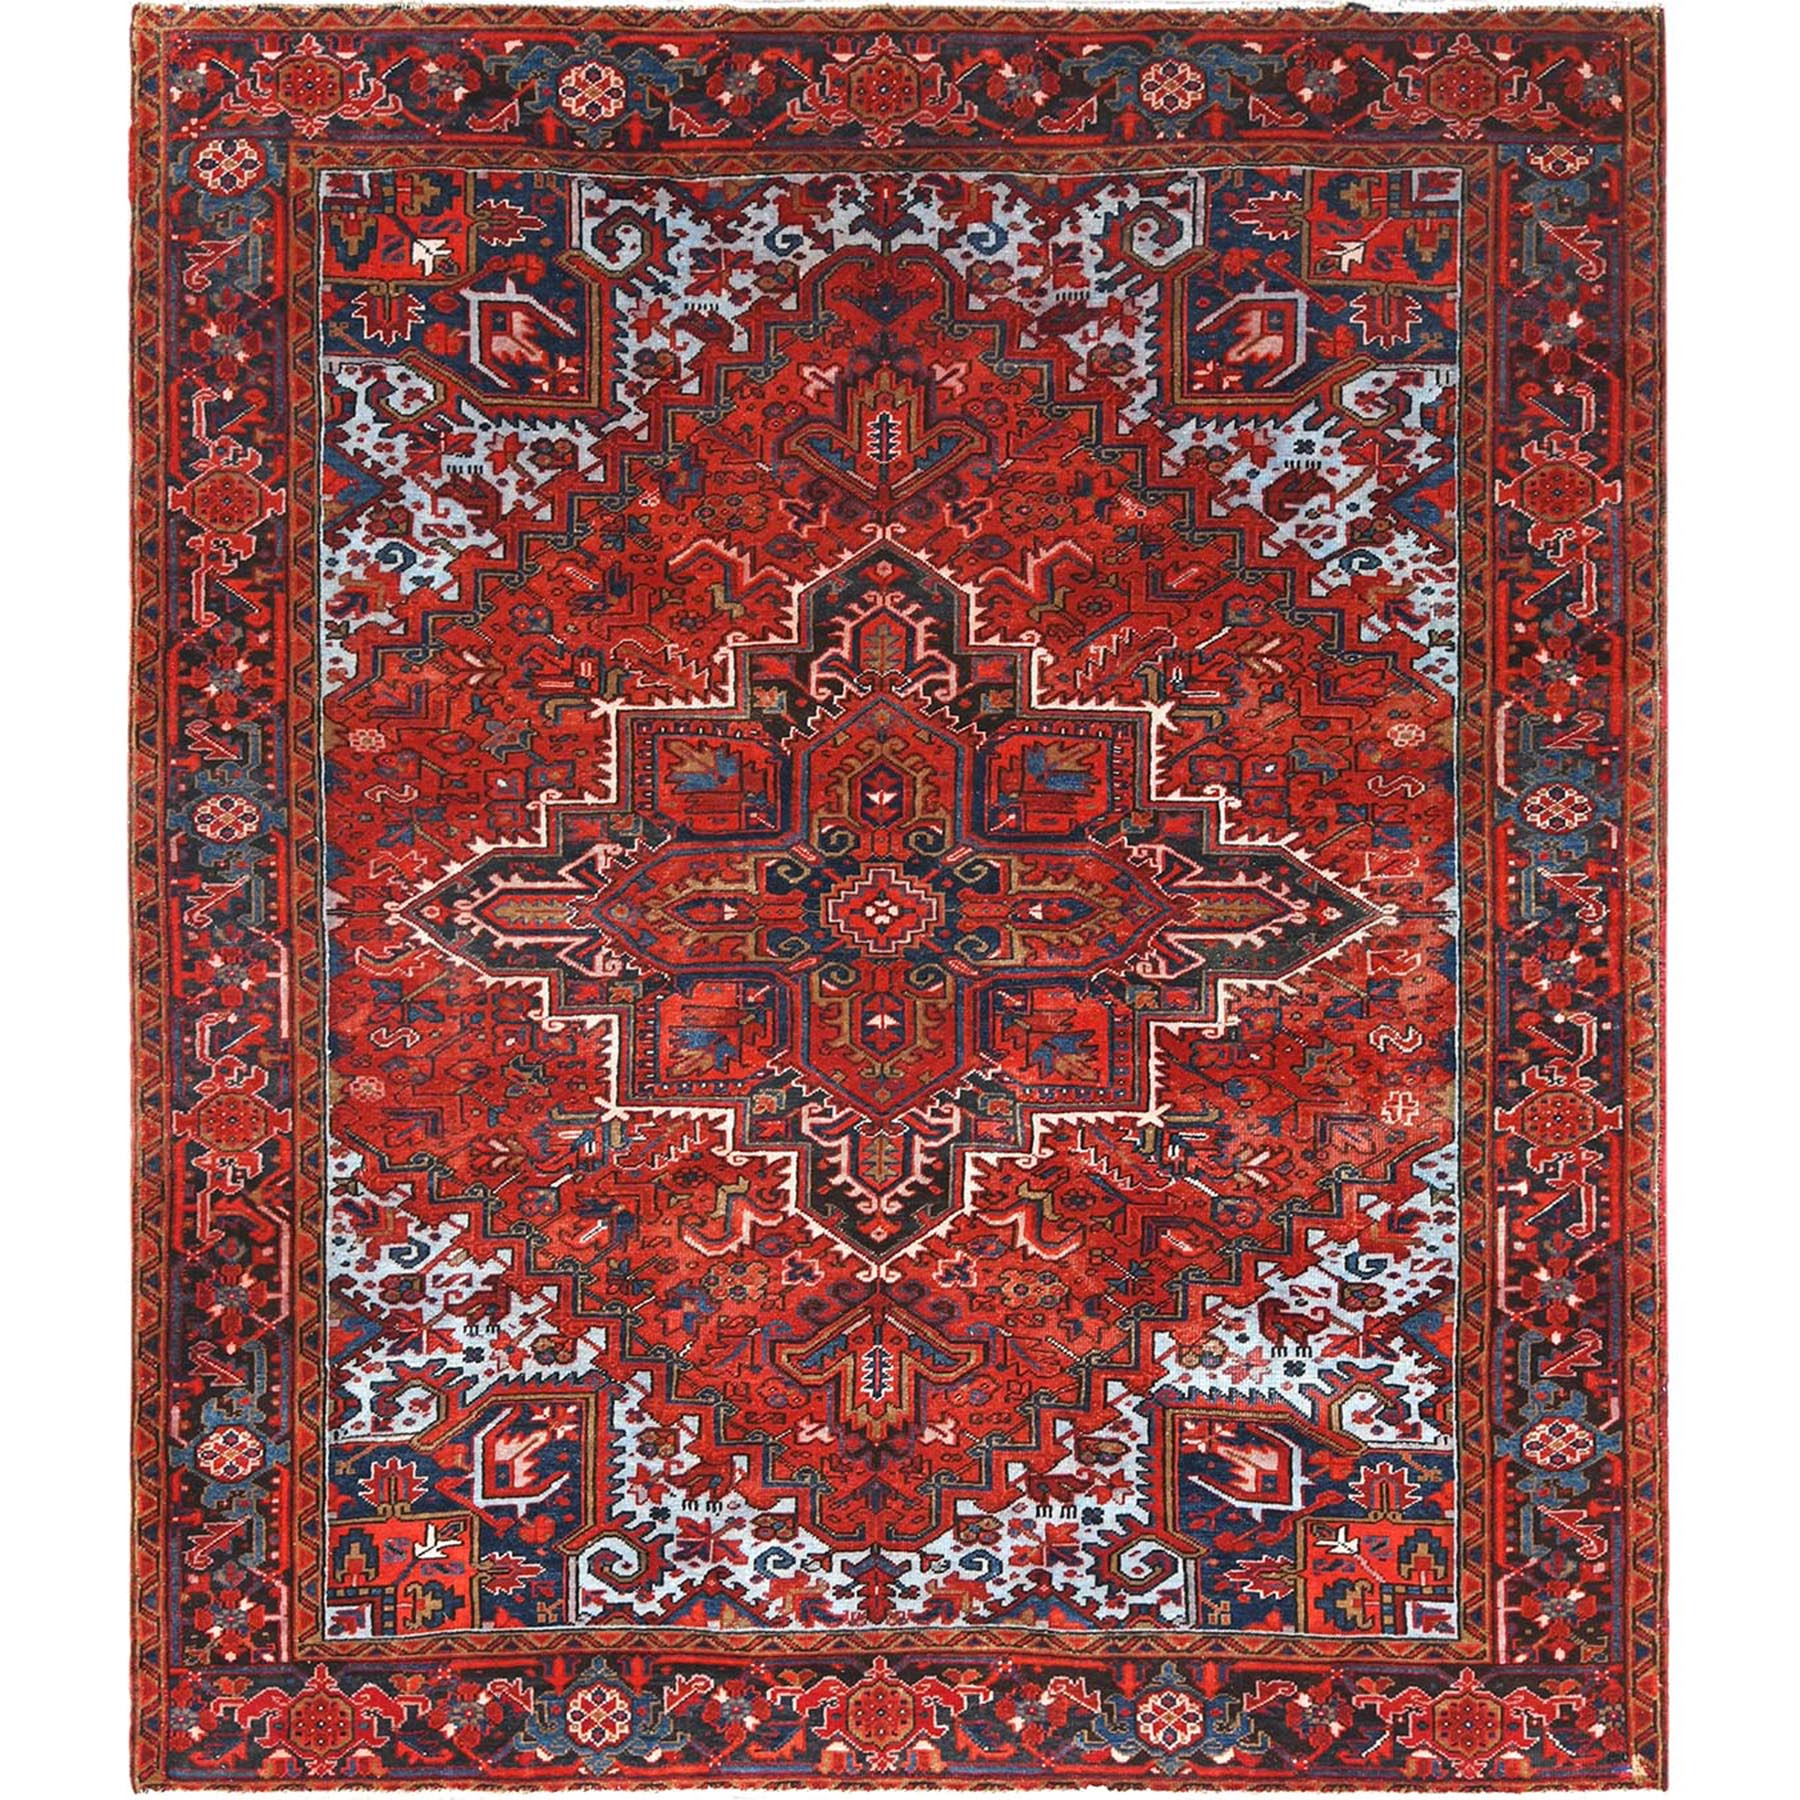  Wool Hand-Knotted Area Rug 7'8